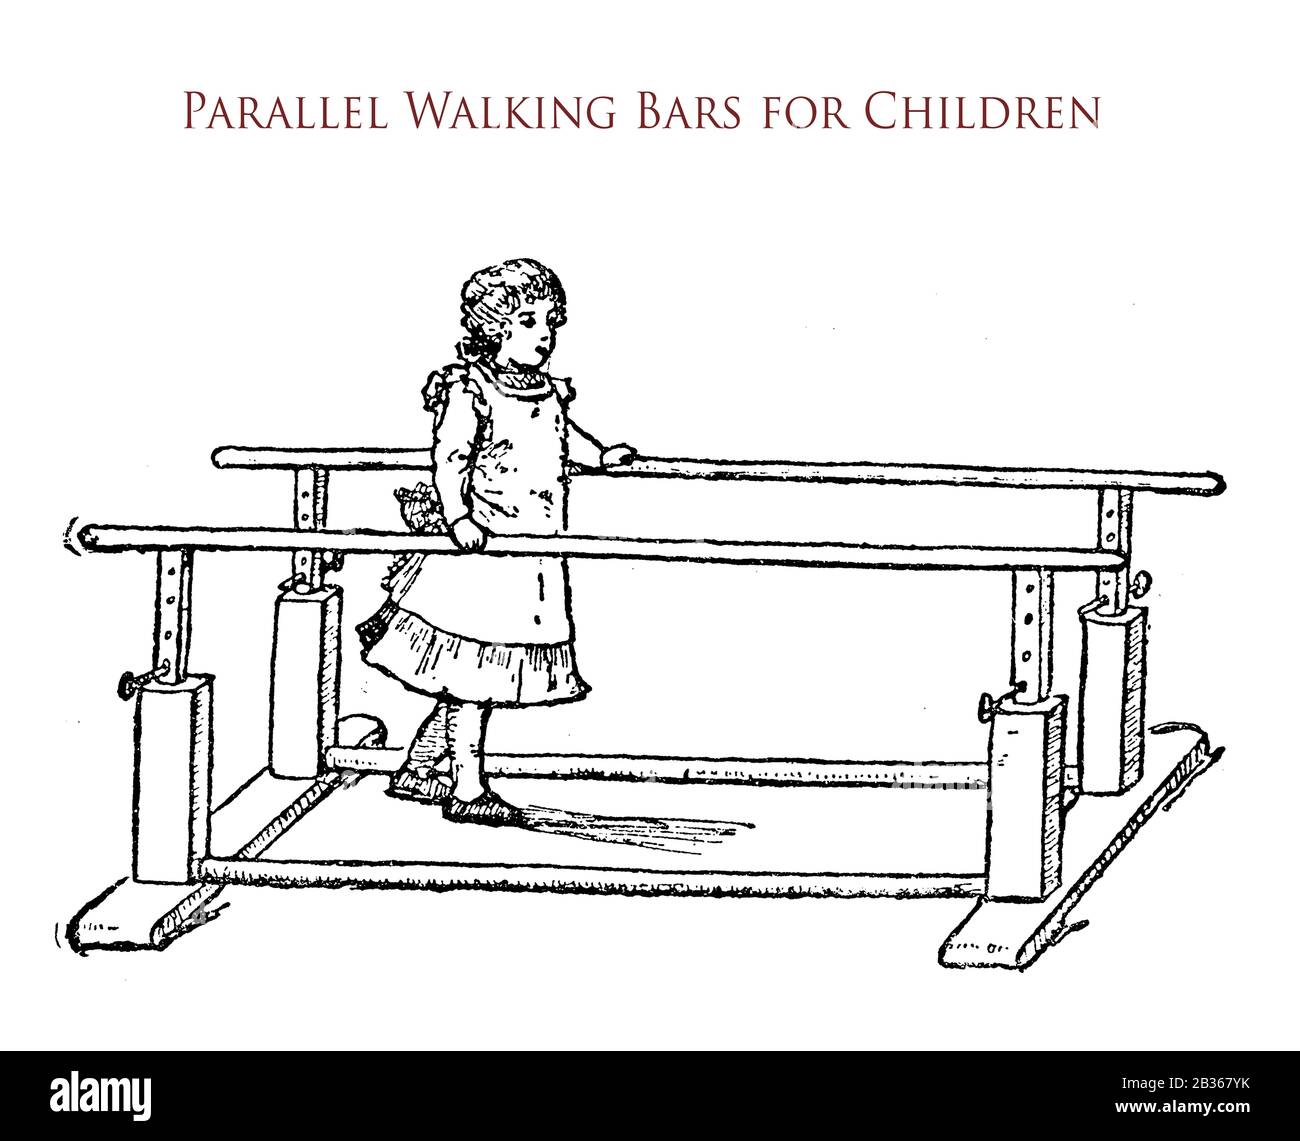 Healthcare and medicine: gymnastic and workout for children with parallel walking bars, 19th century Stock Photo